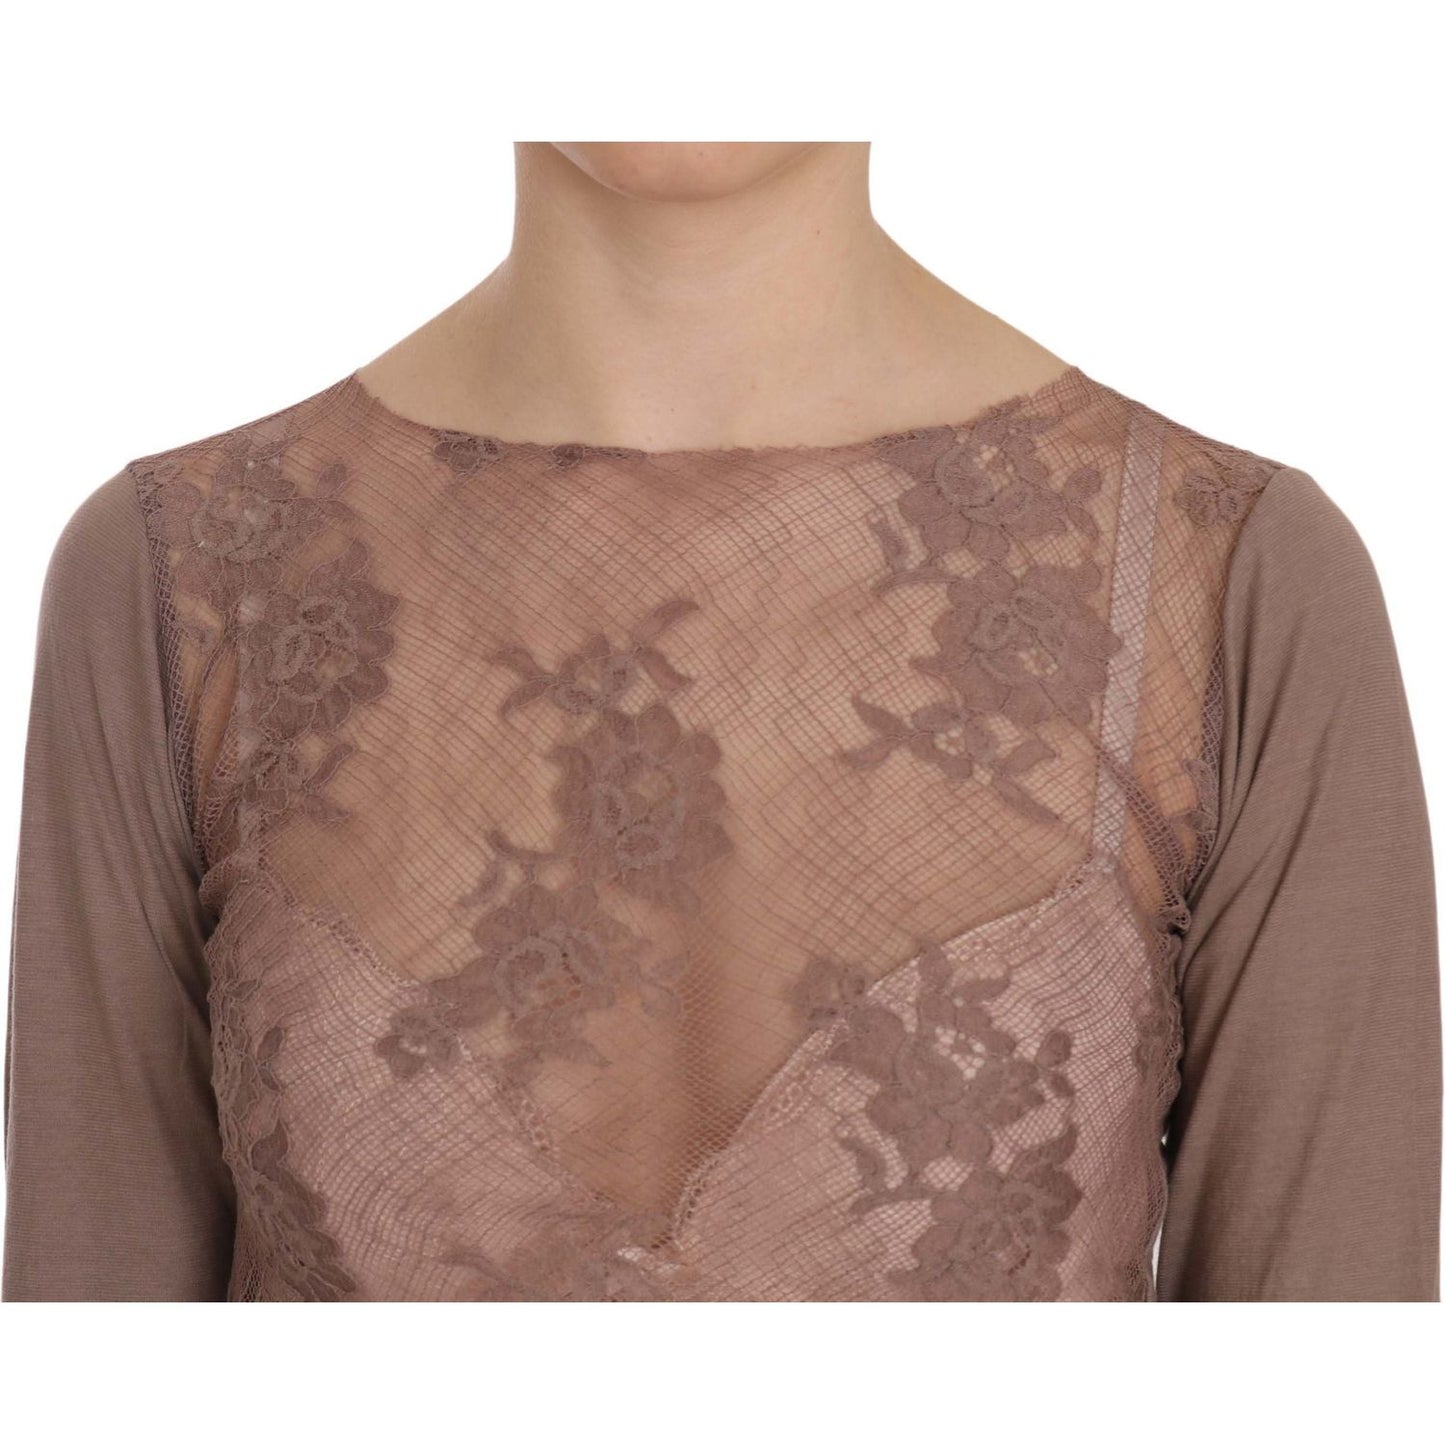 PINK MEMORIES Boat Neck Cotton Lace Blouse brown-lace-see-through-long-sleeve-top IMG_2842-scaled-6259d5ac-45b.jpg